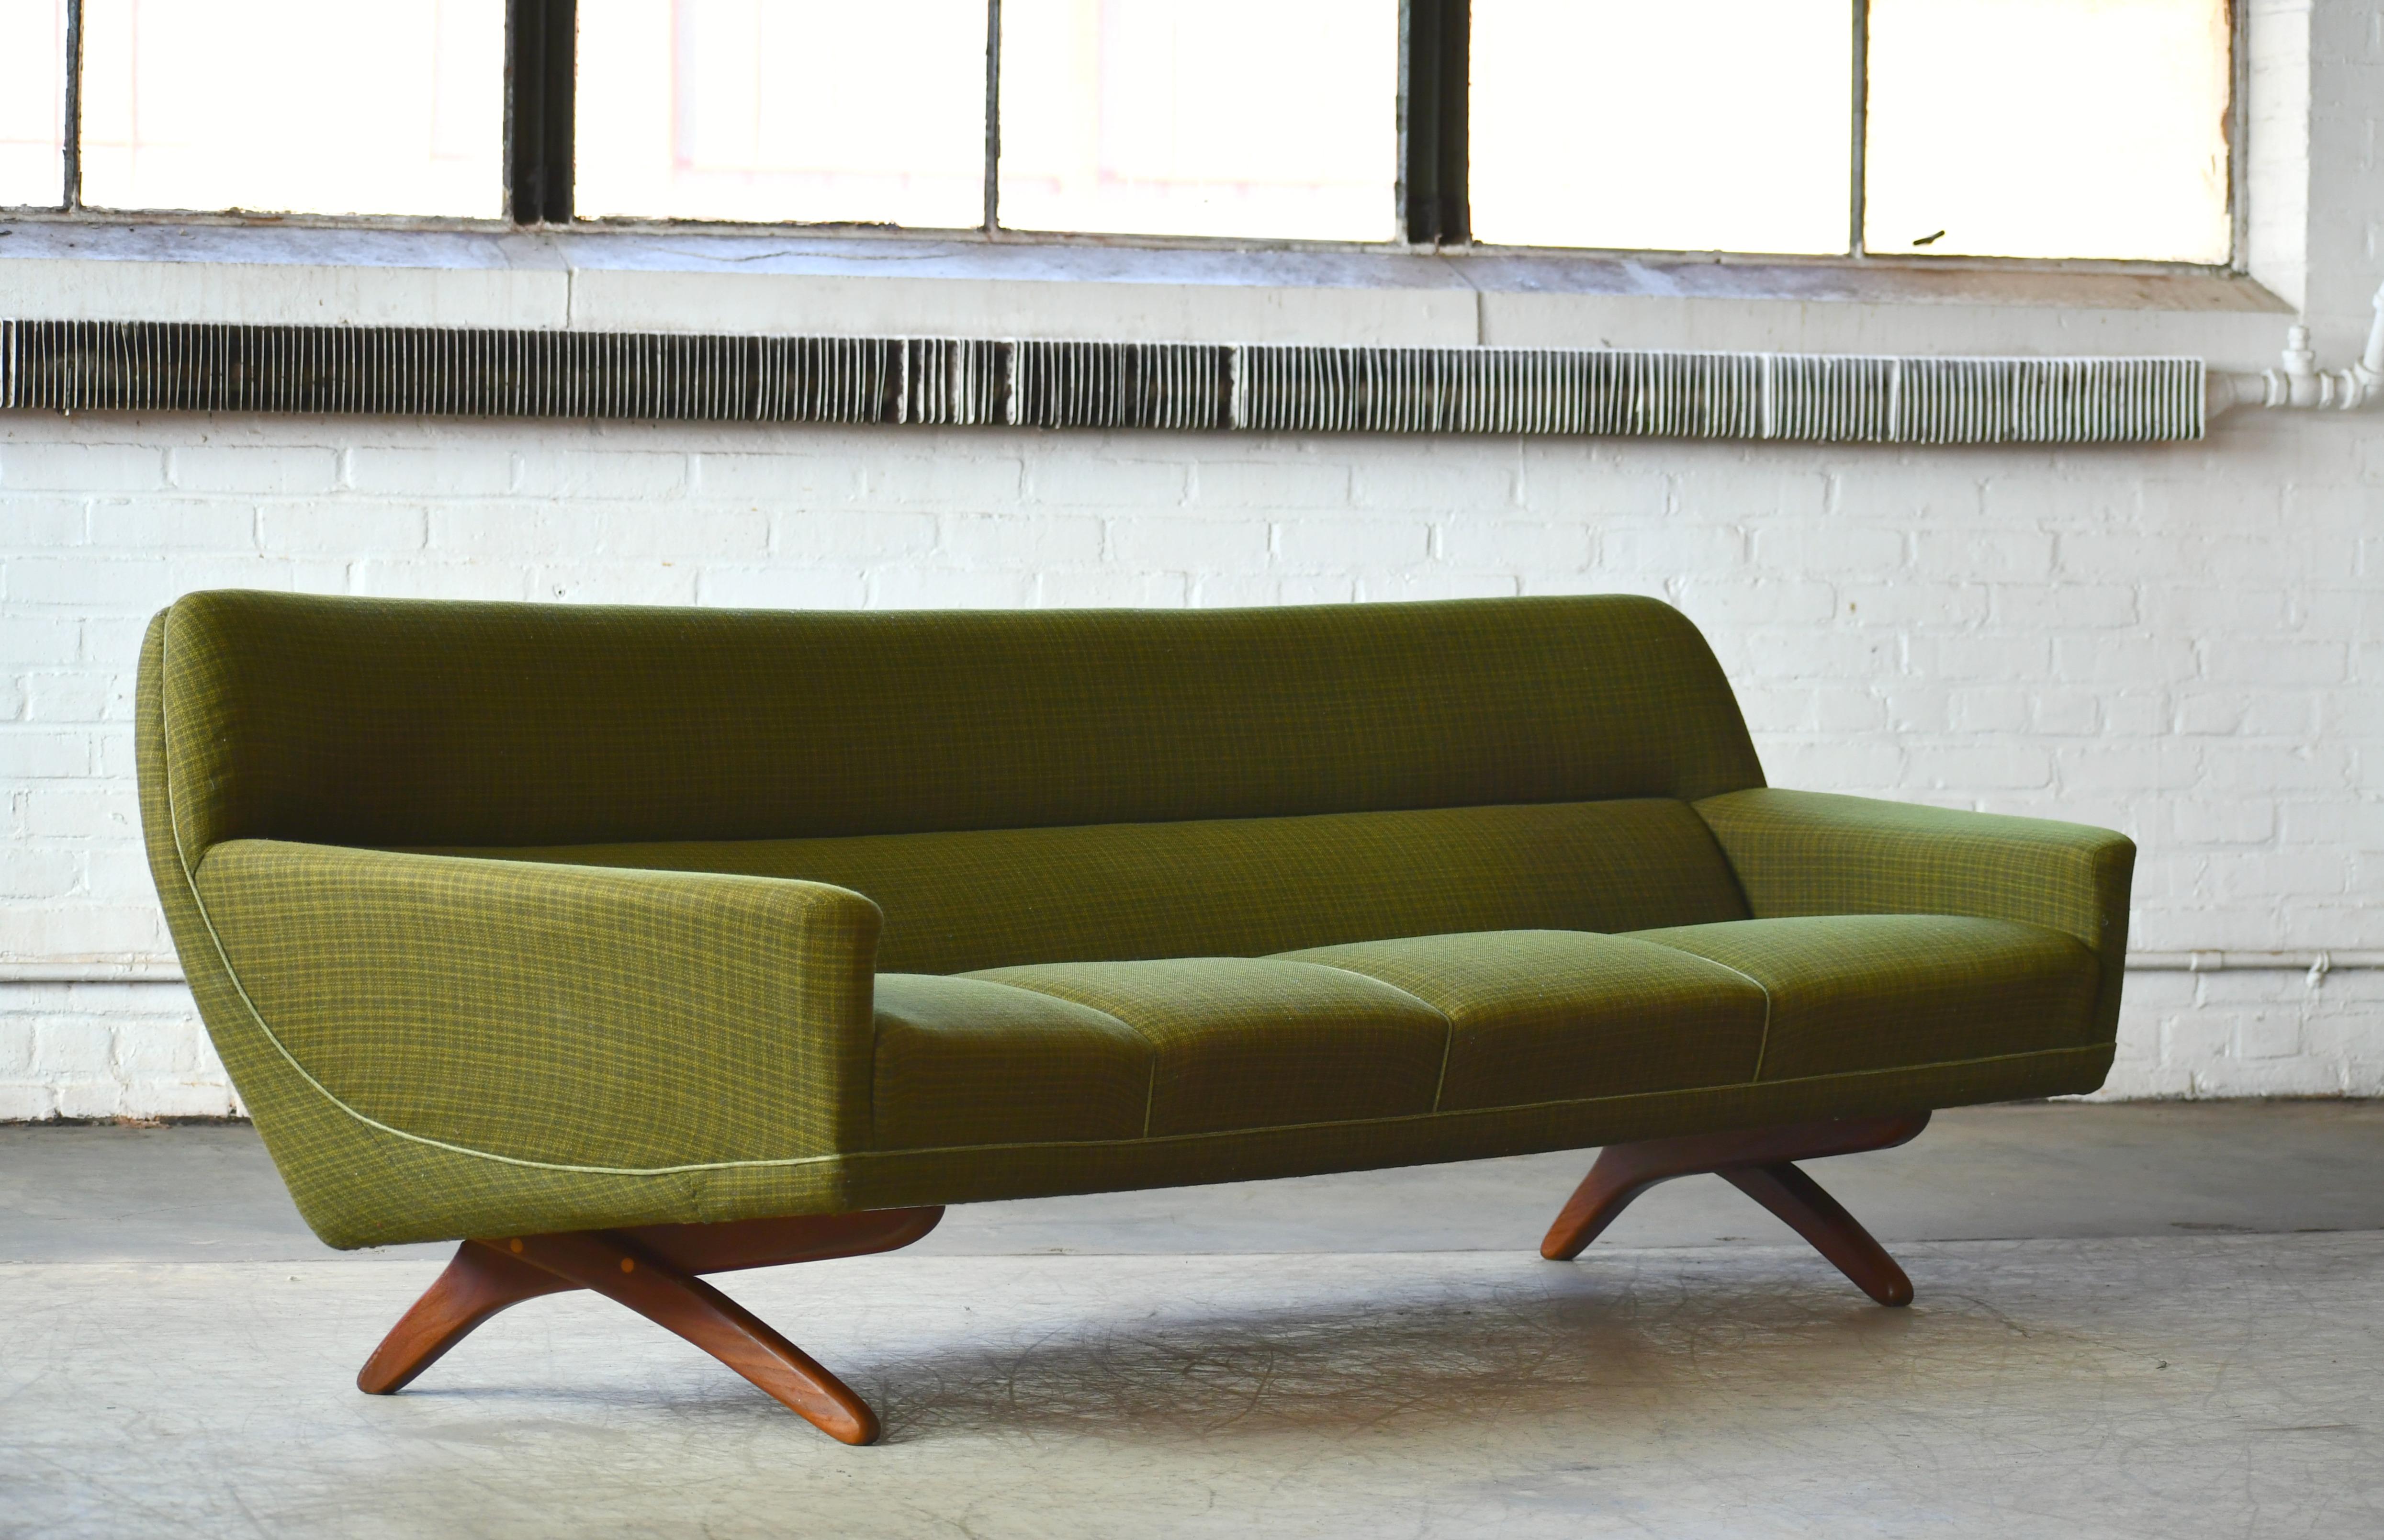 Stunning large Danish modern 1960s sofa designed by Illum Wikkelso and most likely manufactured by Soren Willadsen in the early 1960s. Cross leg design in solid teak typical for many of Wikkelso's iconic designs and beautiful rounded organic lines.